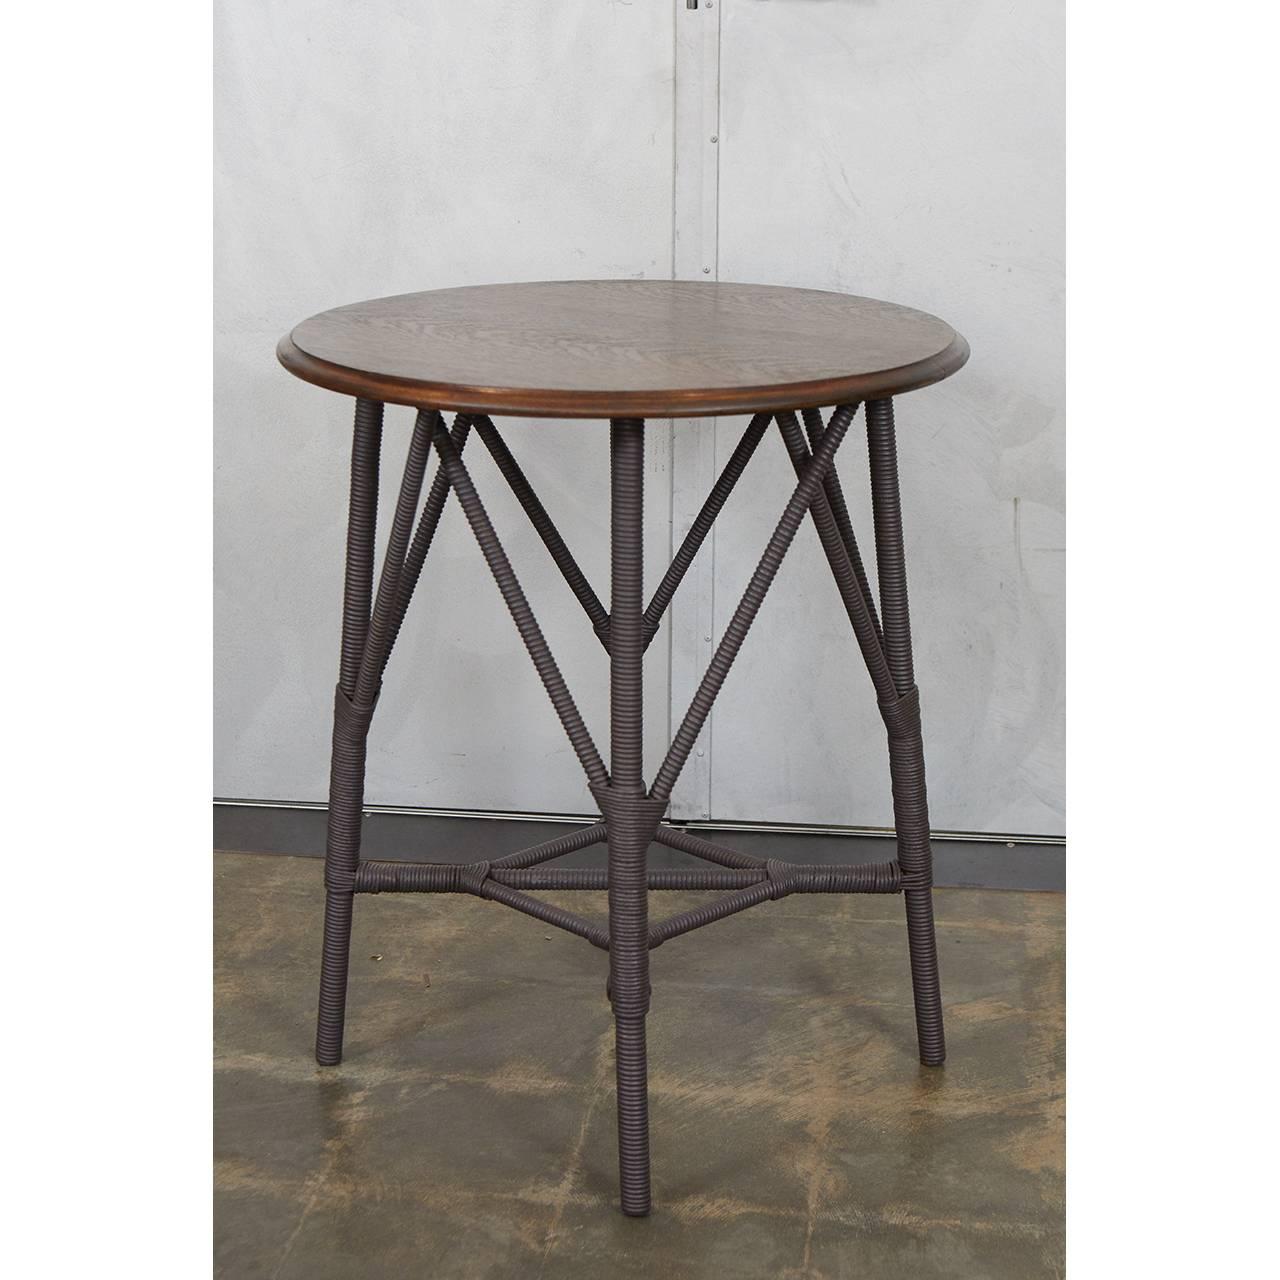 American Wood and Wicker Table In Good Condition For Sale In Culver City, CA